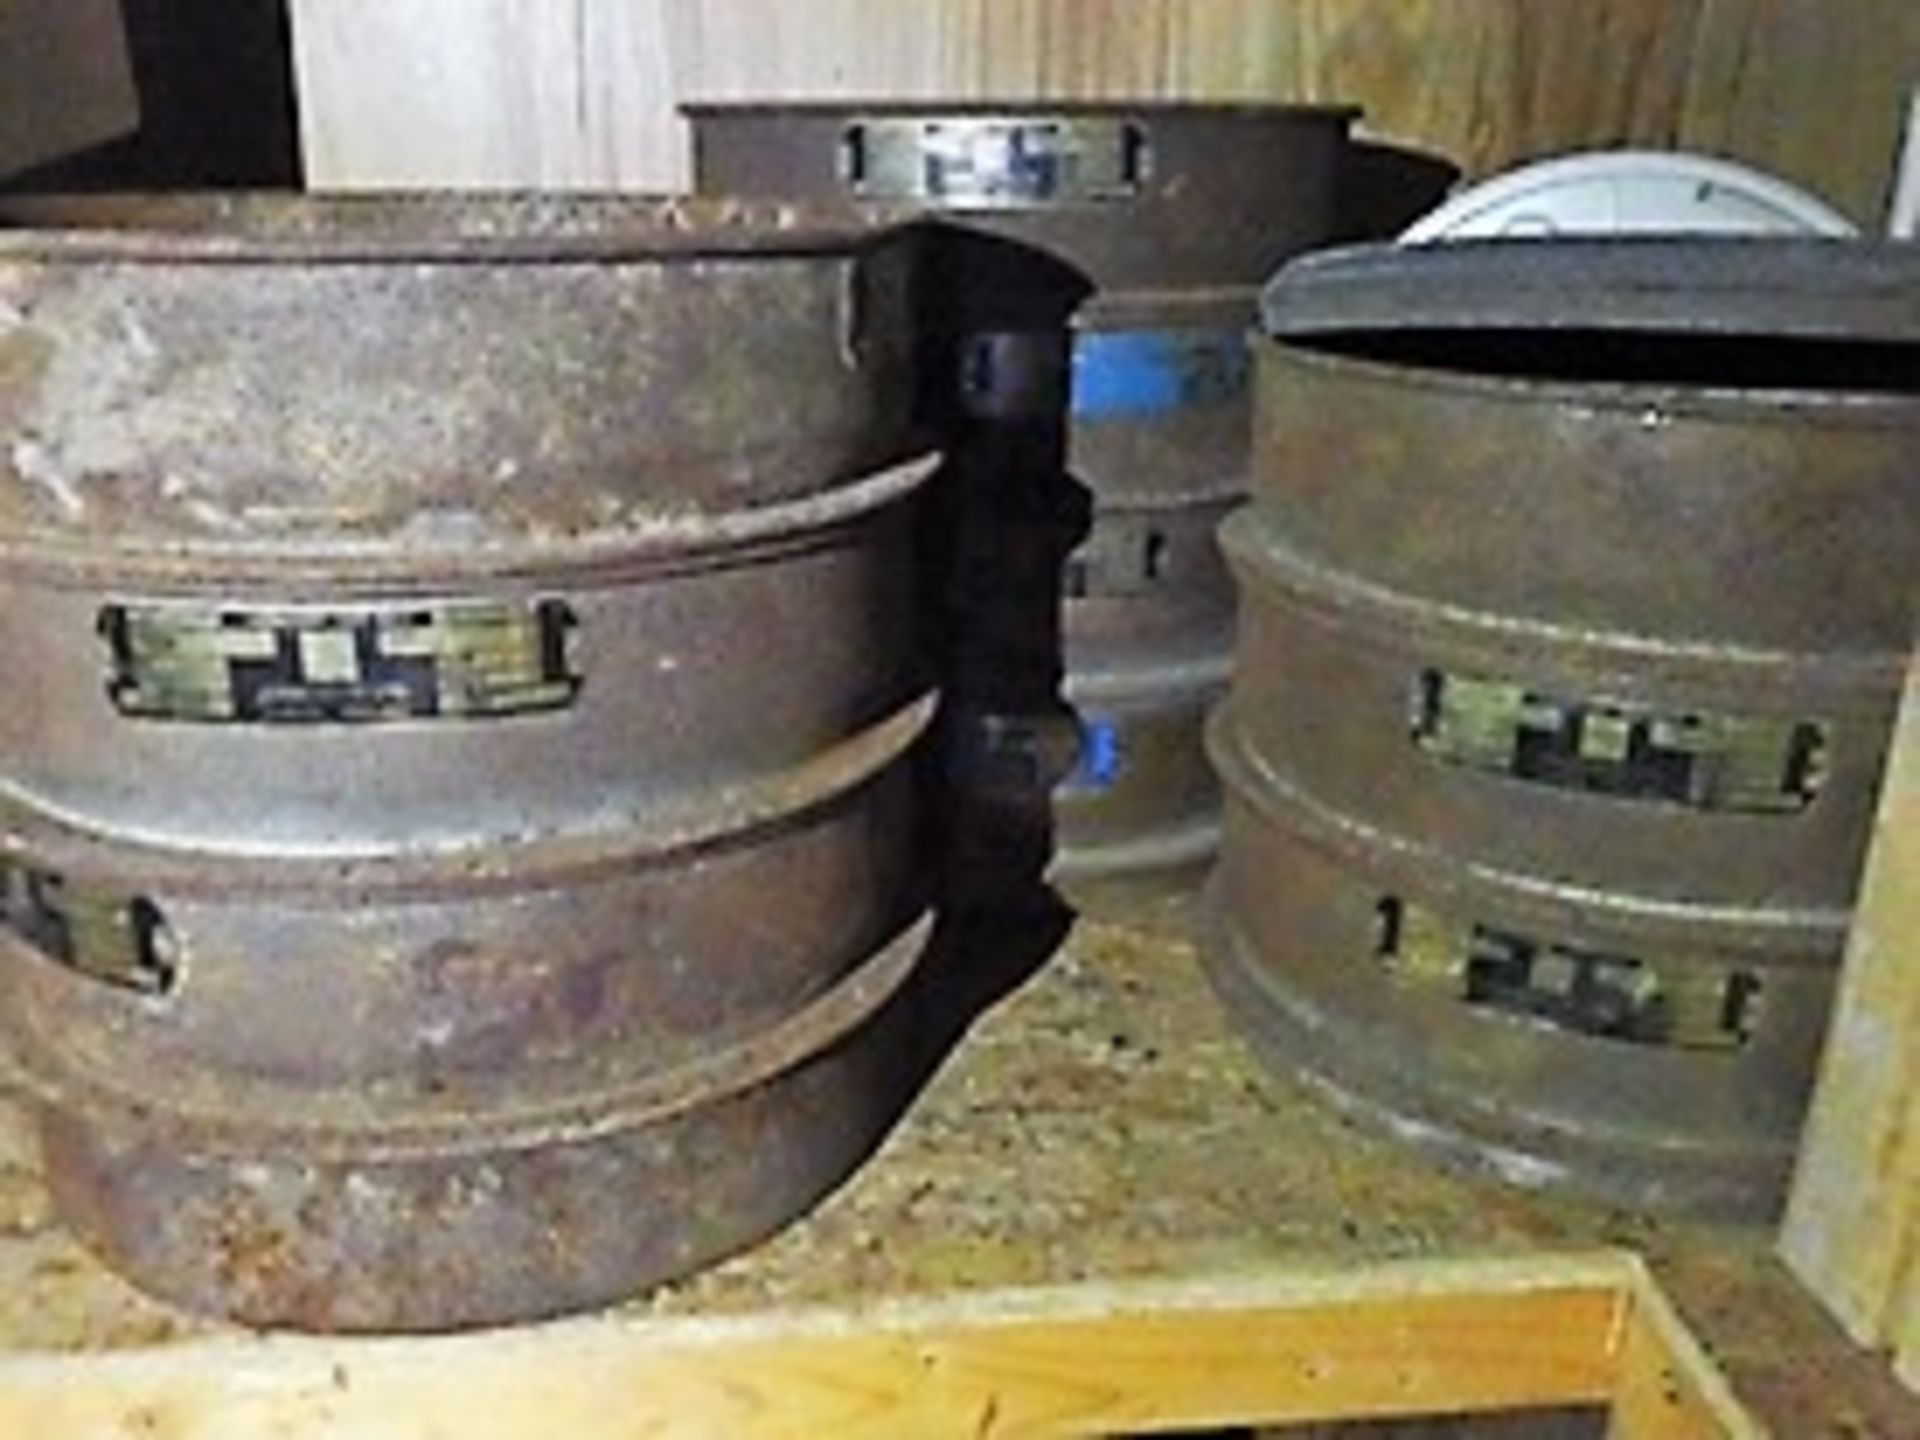 APPROX 11 SIZE TESTING SIEVES, 300MM DIAMETER